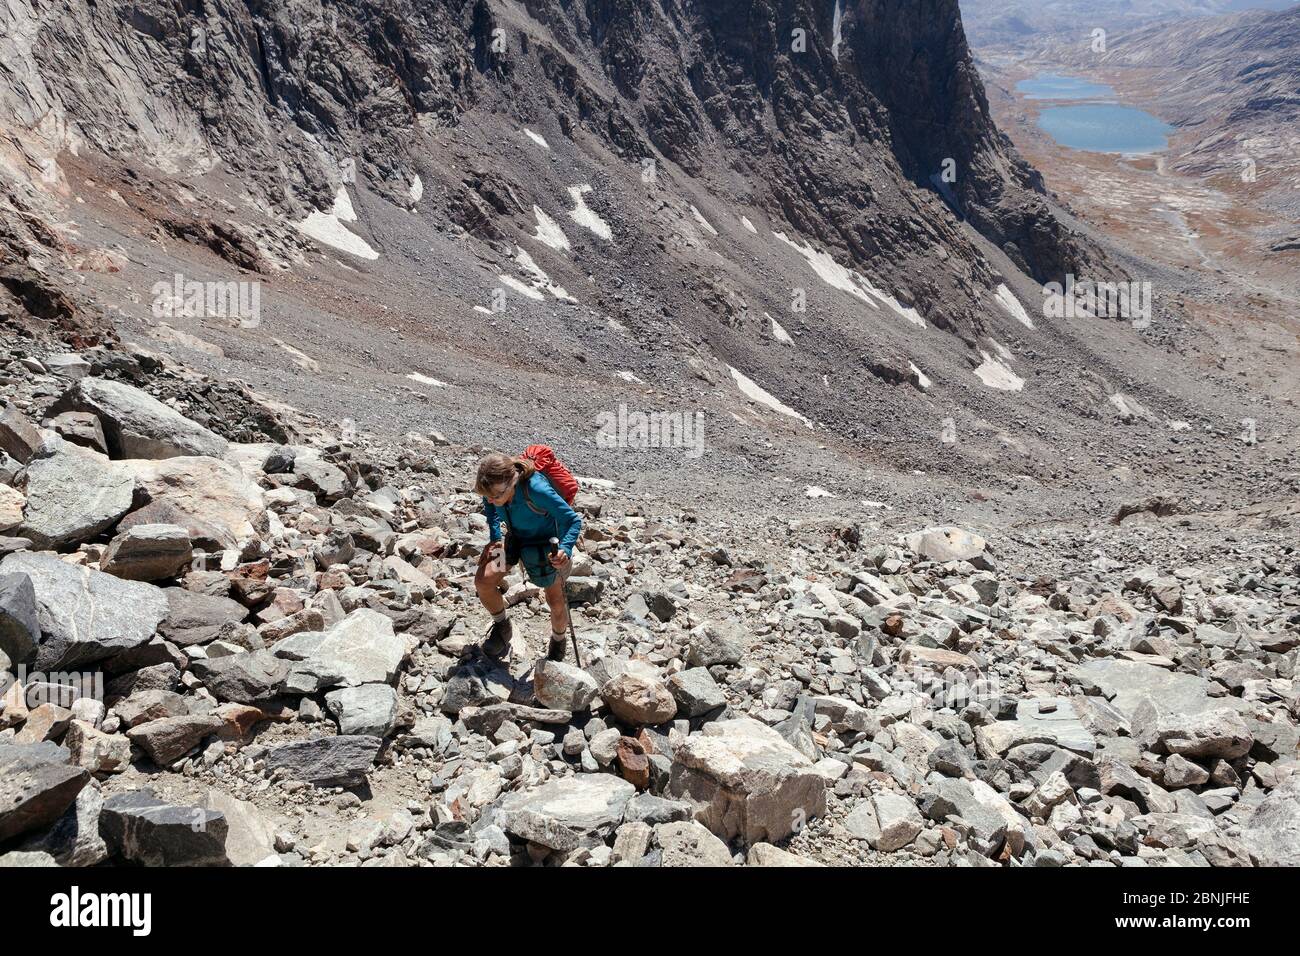 Hiker aproaching Dinwoody pass from Titcomb Basin, Wind River Range, Bridger Wilderness, Wyoming, USA. September 2015. Model released. Stock Photo